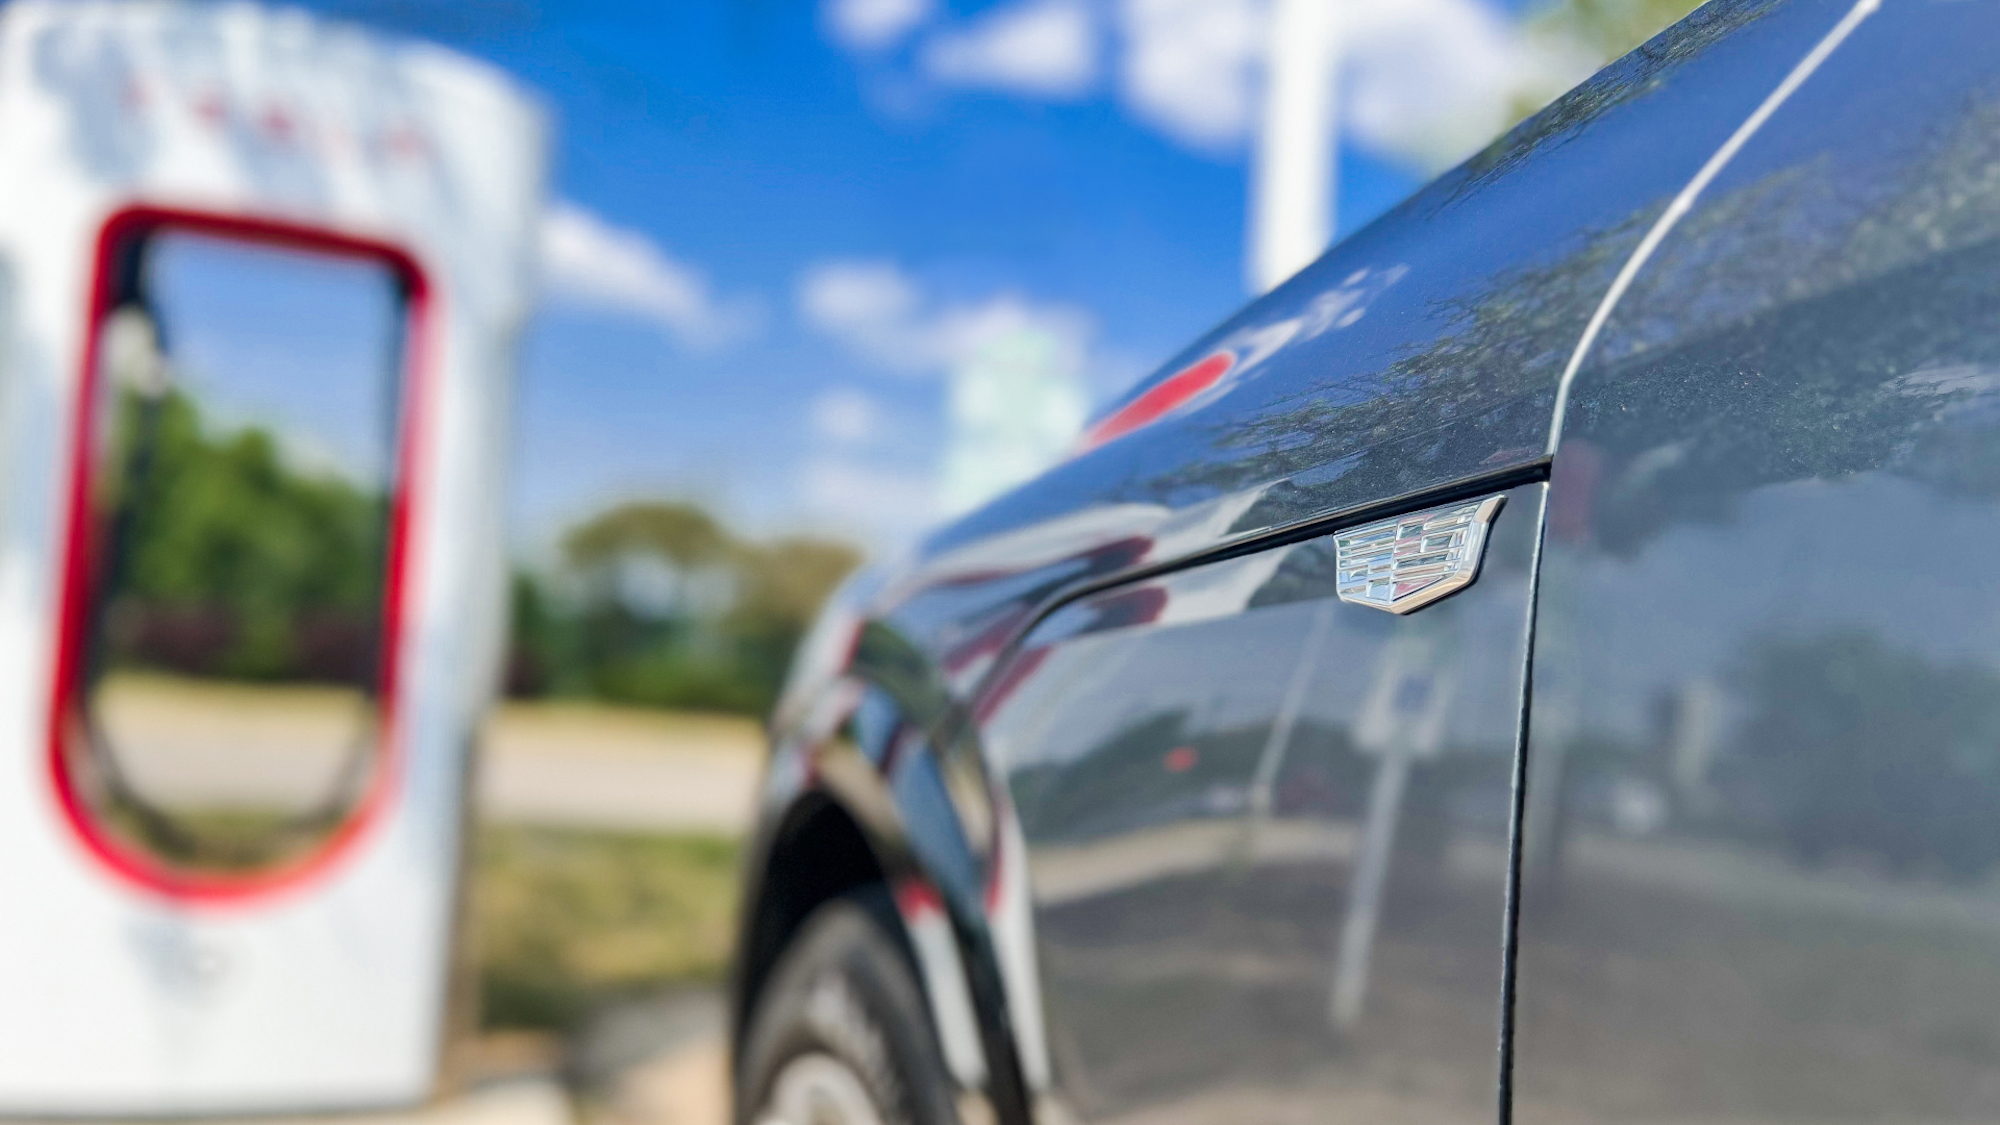 A close-up view of the front fender badge and charge door on a Cadillac LYRIQ parked at a Tesla Supercharger station.